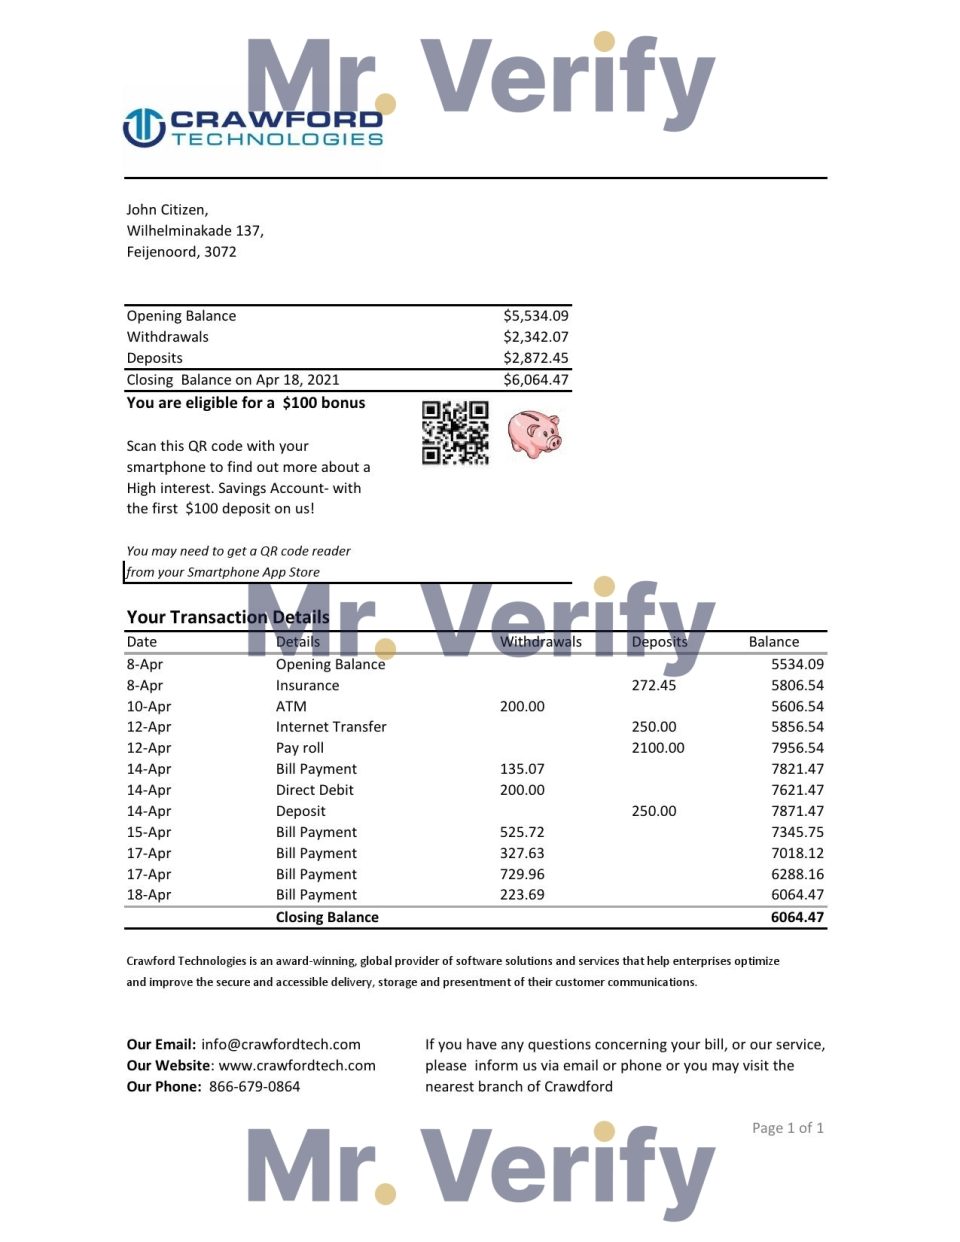 Netherlands (Holland) Crawford Technologies Bank statement easy to fill template in Excel and PDF format